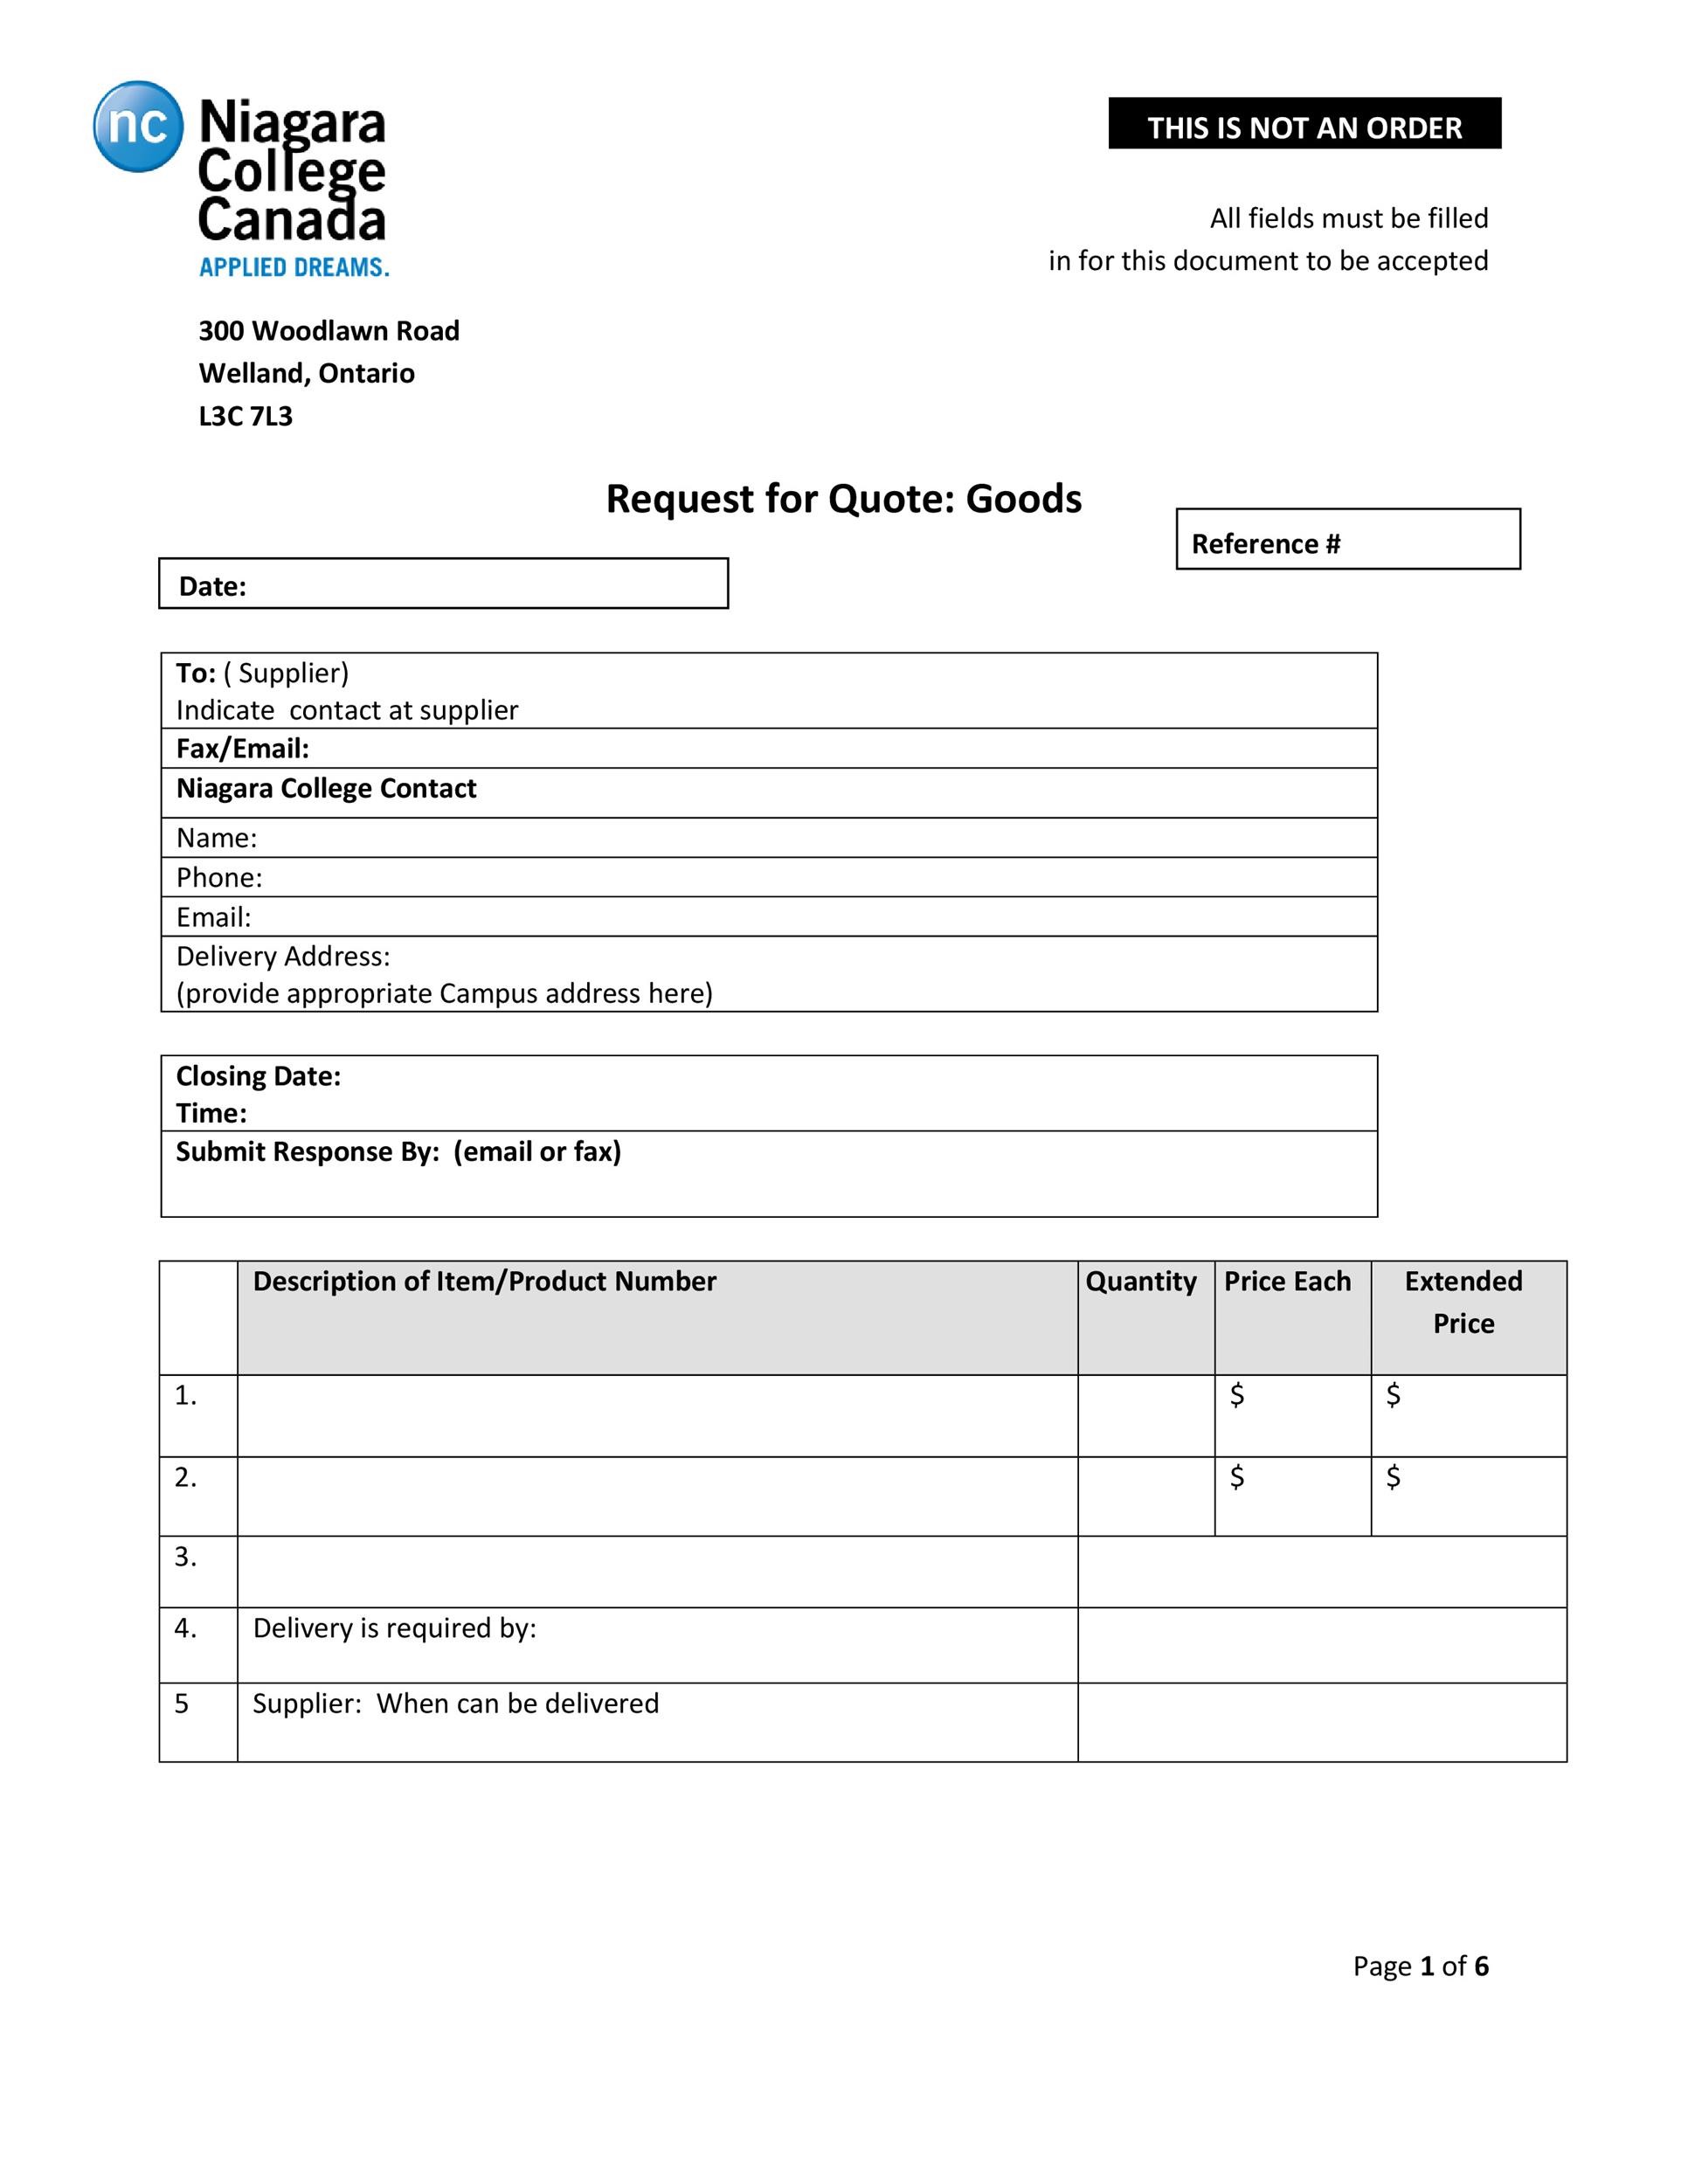 50 Simple Request For Quote Templates Forms TemplateLab